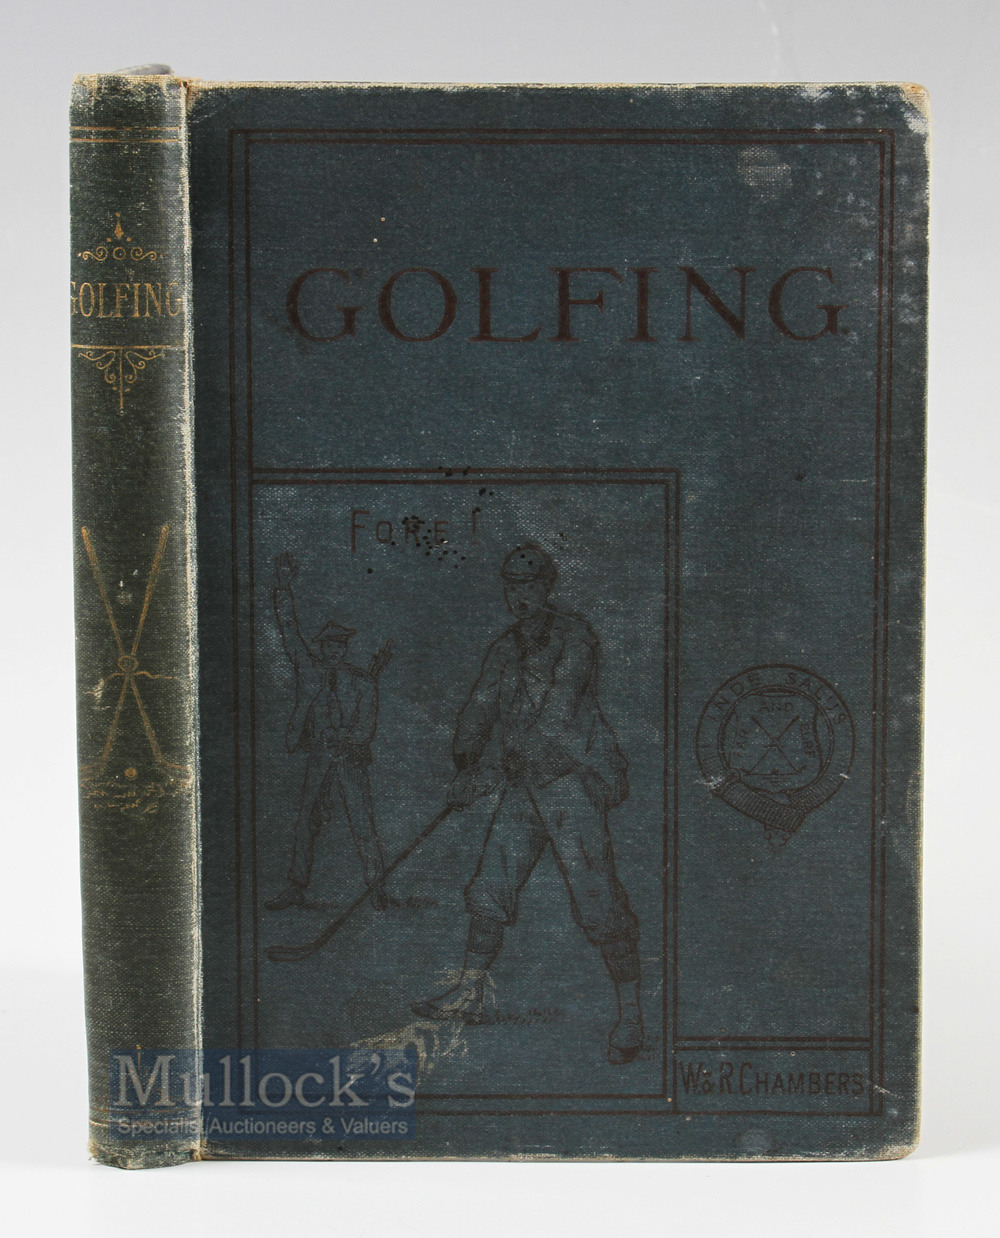 Chambers, W&R - 'Golfing - A Handbook to The Royal and Ancient Game with List of Clubs, Rules & Also